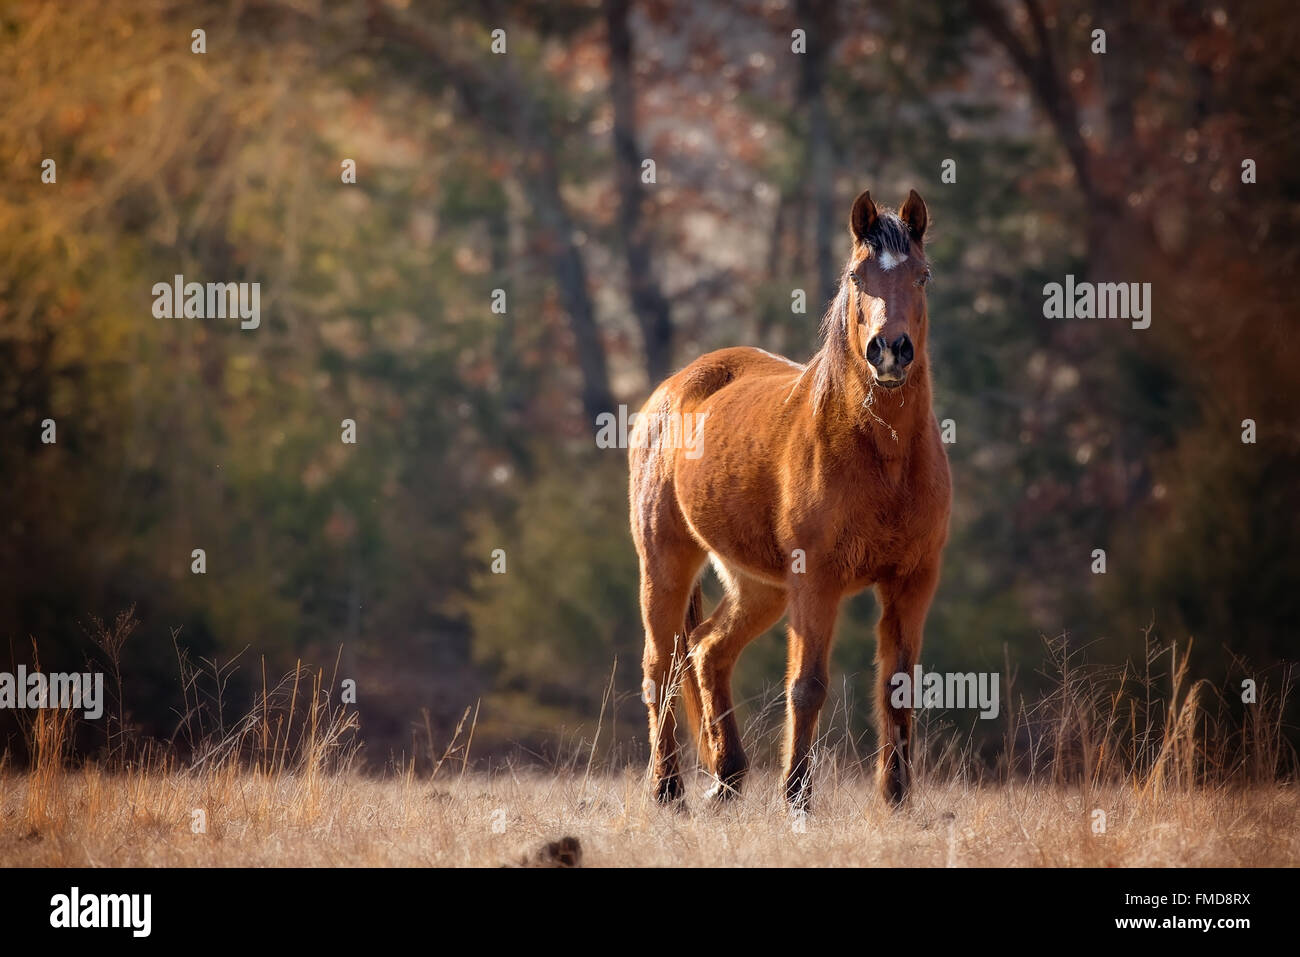 Arabian horse stands in a field with sun shining on it. Stock Photo